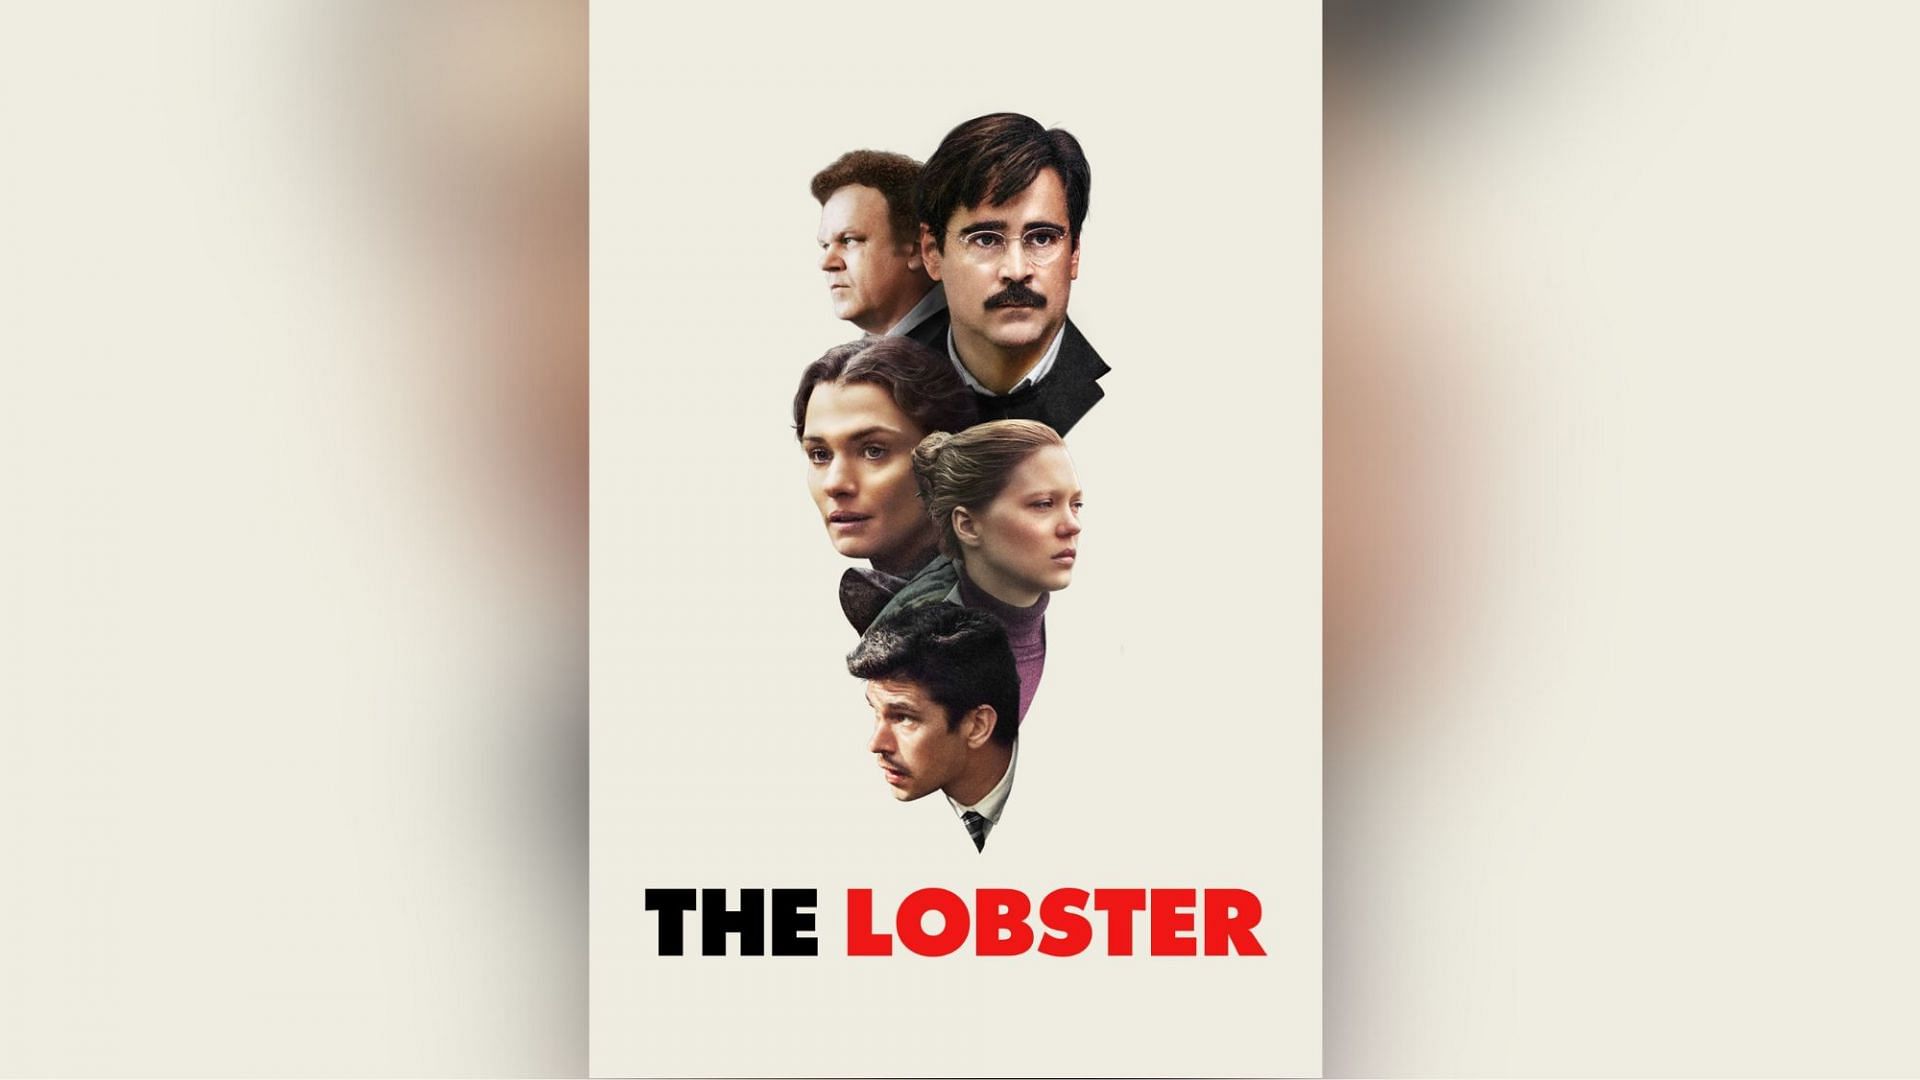 The Lobster (Image via A24)